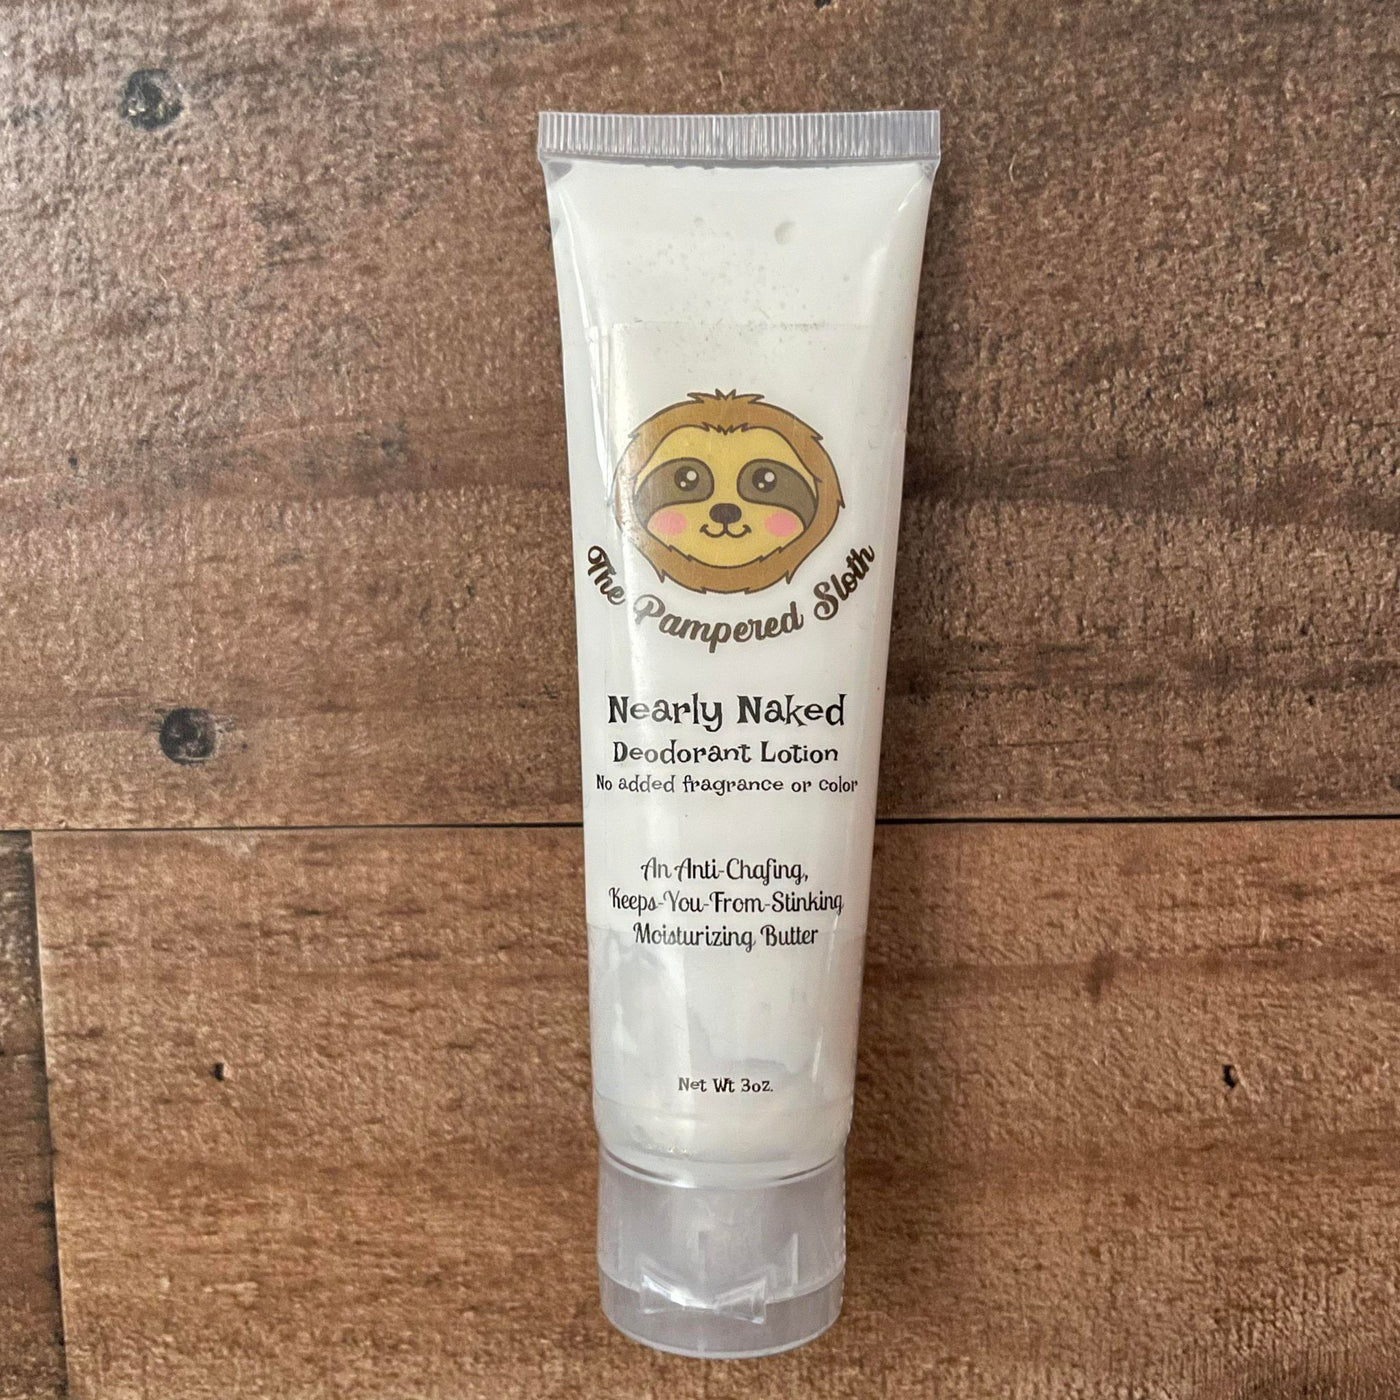 Pampered Sloth Deodorant Lotion for Sweaty Bits